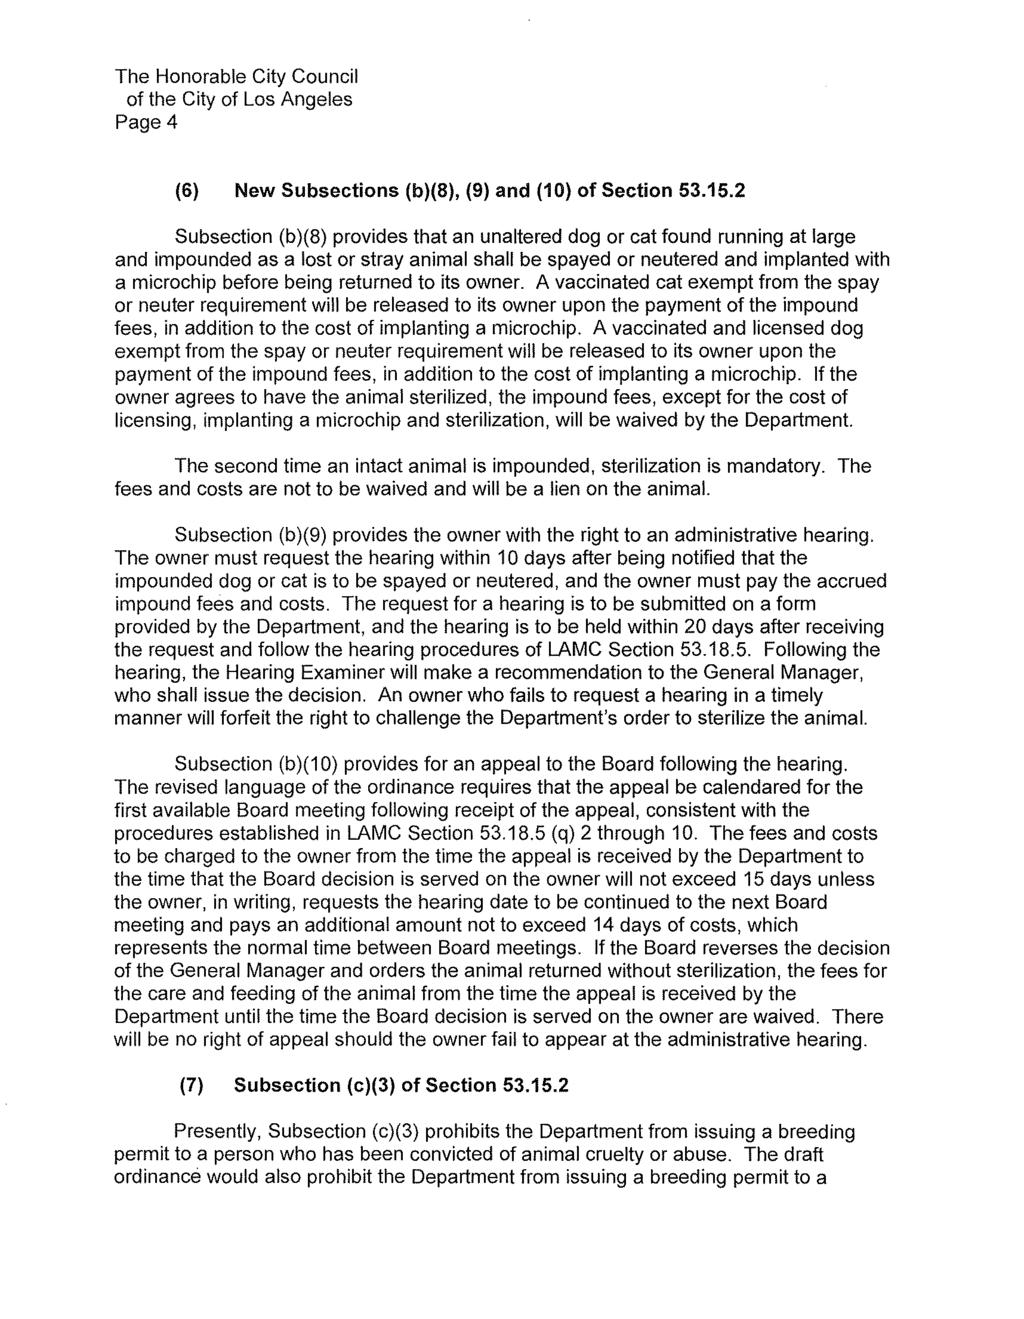 The Honorable City Council of the City of Los Angeles Page 4 (6) New Subsections (b)(s), (9) and (10) of Section 53.15.